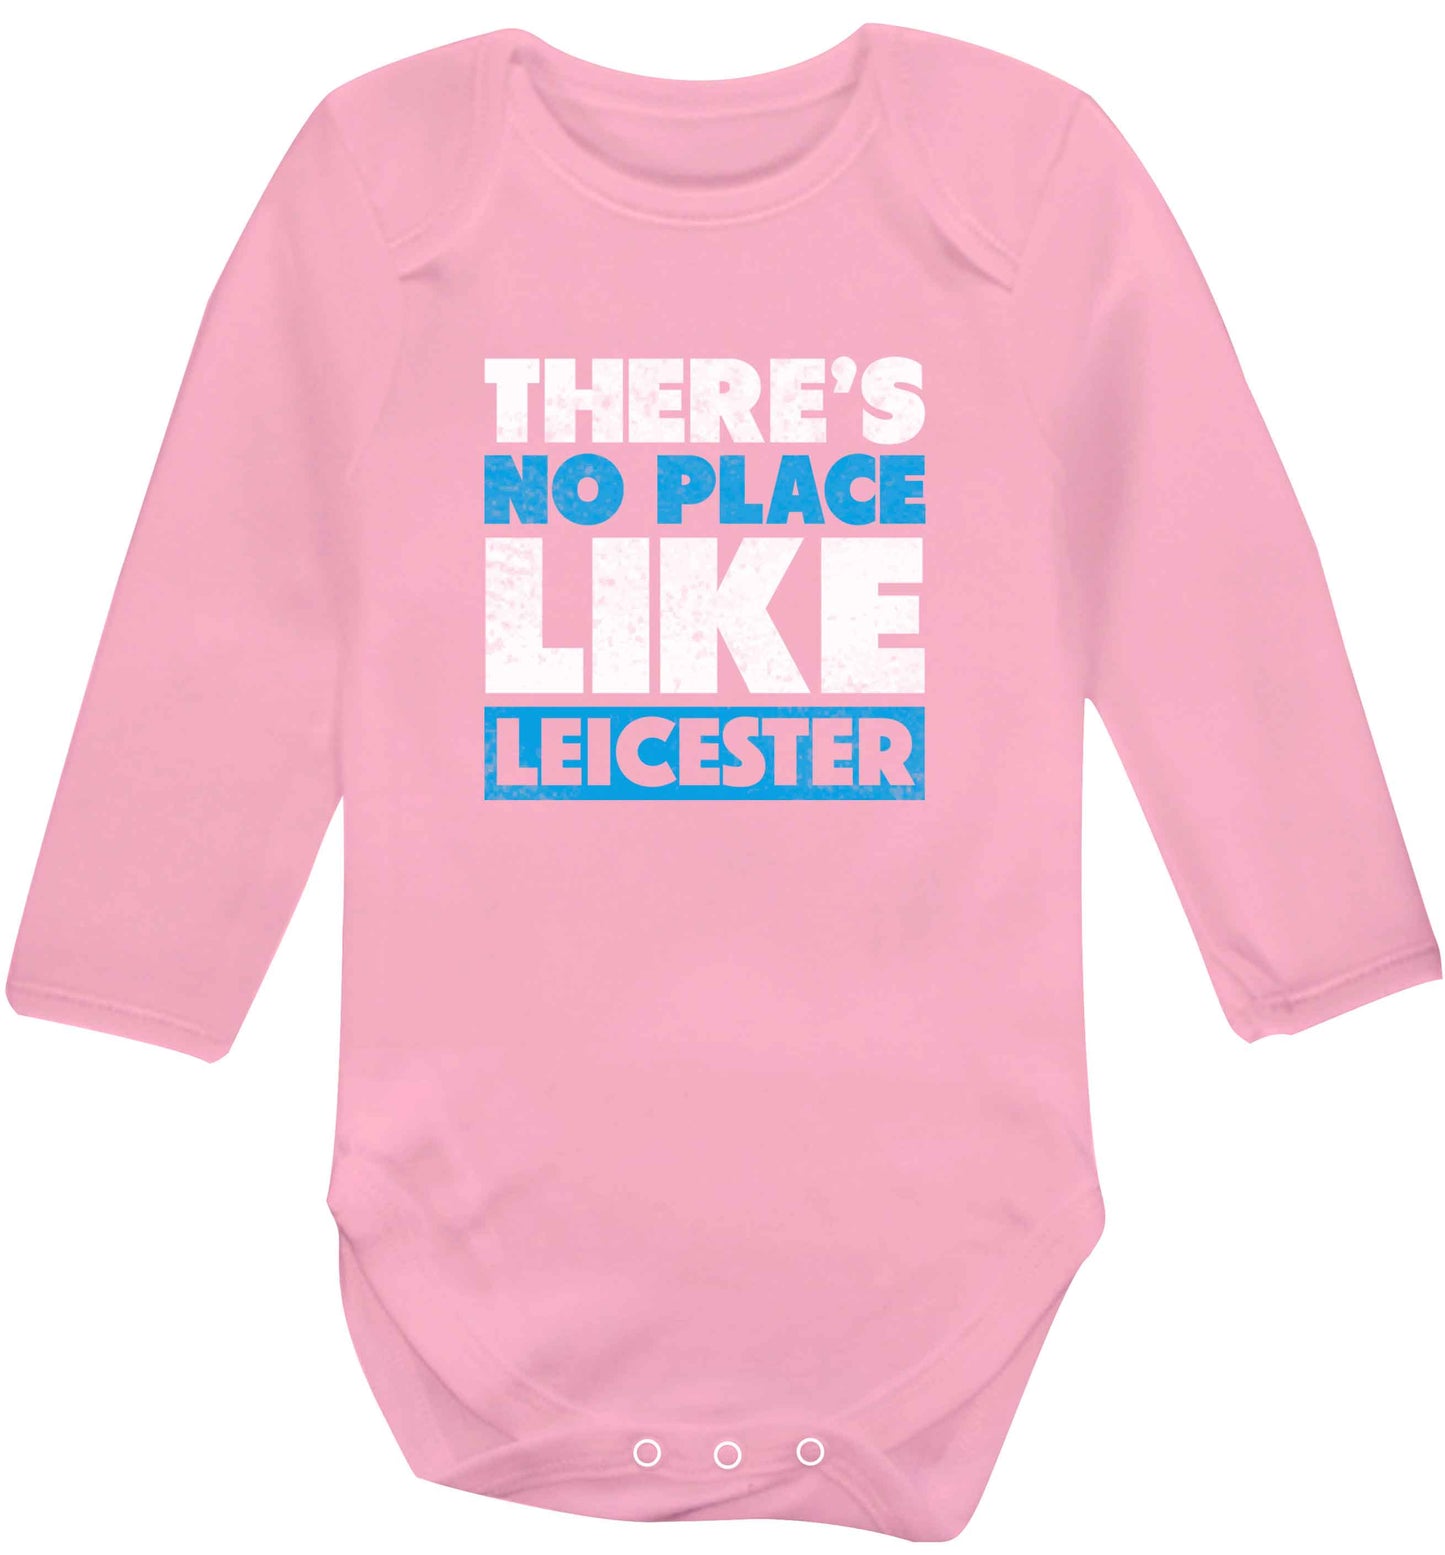 There's no place like Leicester baby vest long sleeved pale pink 6-12 months